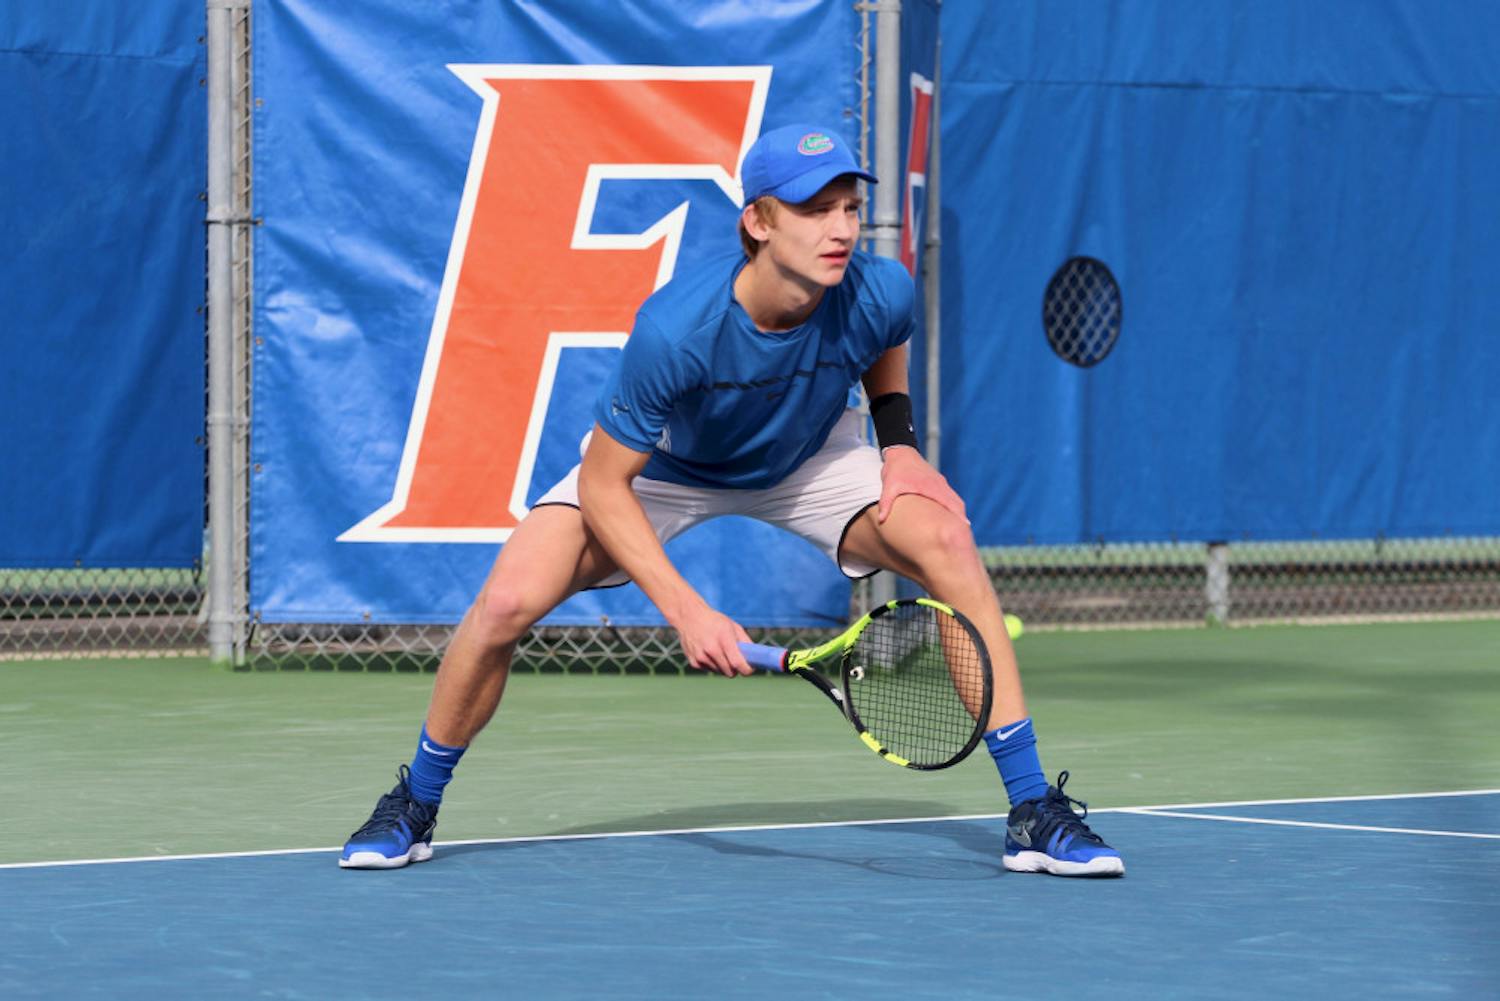 Sophomore Johannes Ingildsen won his doubles set, but ended up losing his singles matchup that included a marathon 7-6(10) first-set loss. 